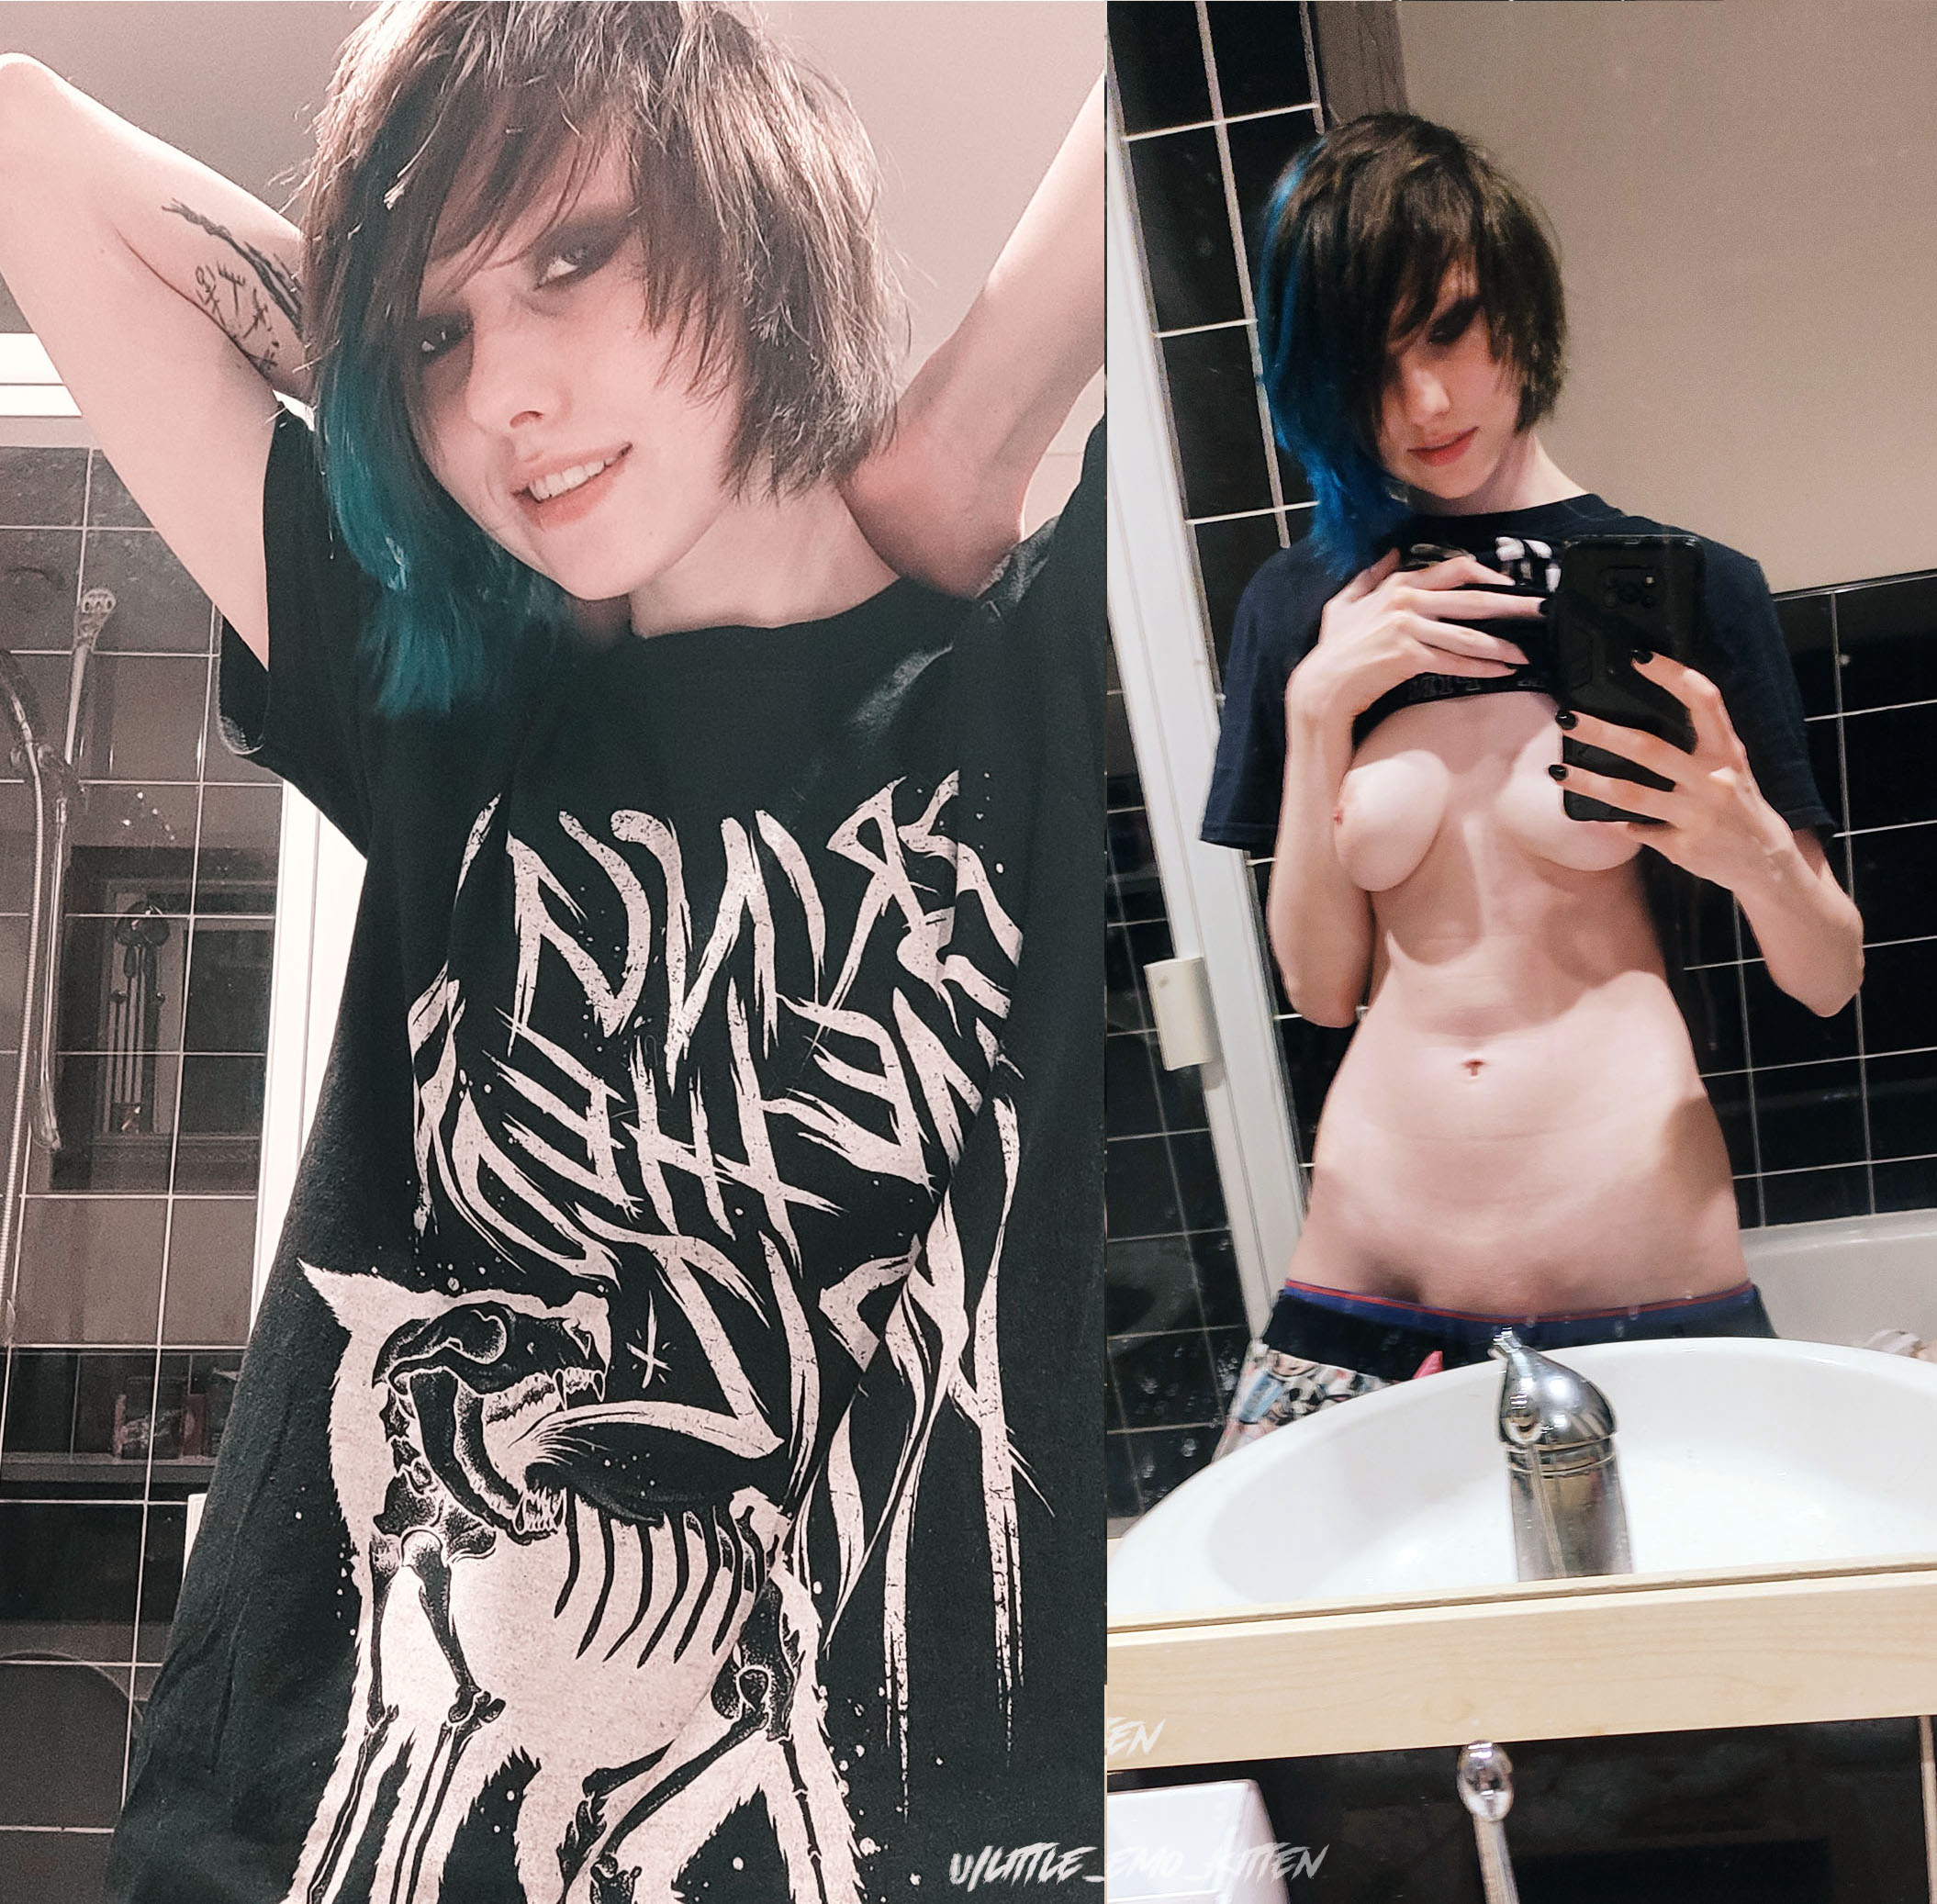 On Or Off? Emo Girl Edition Photo on Porn imgur pic picture